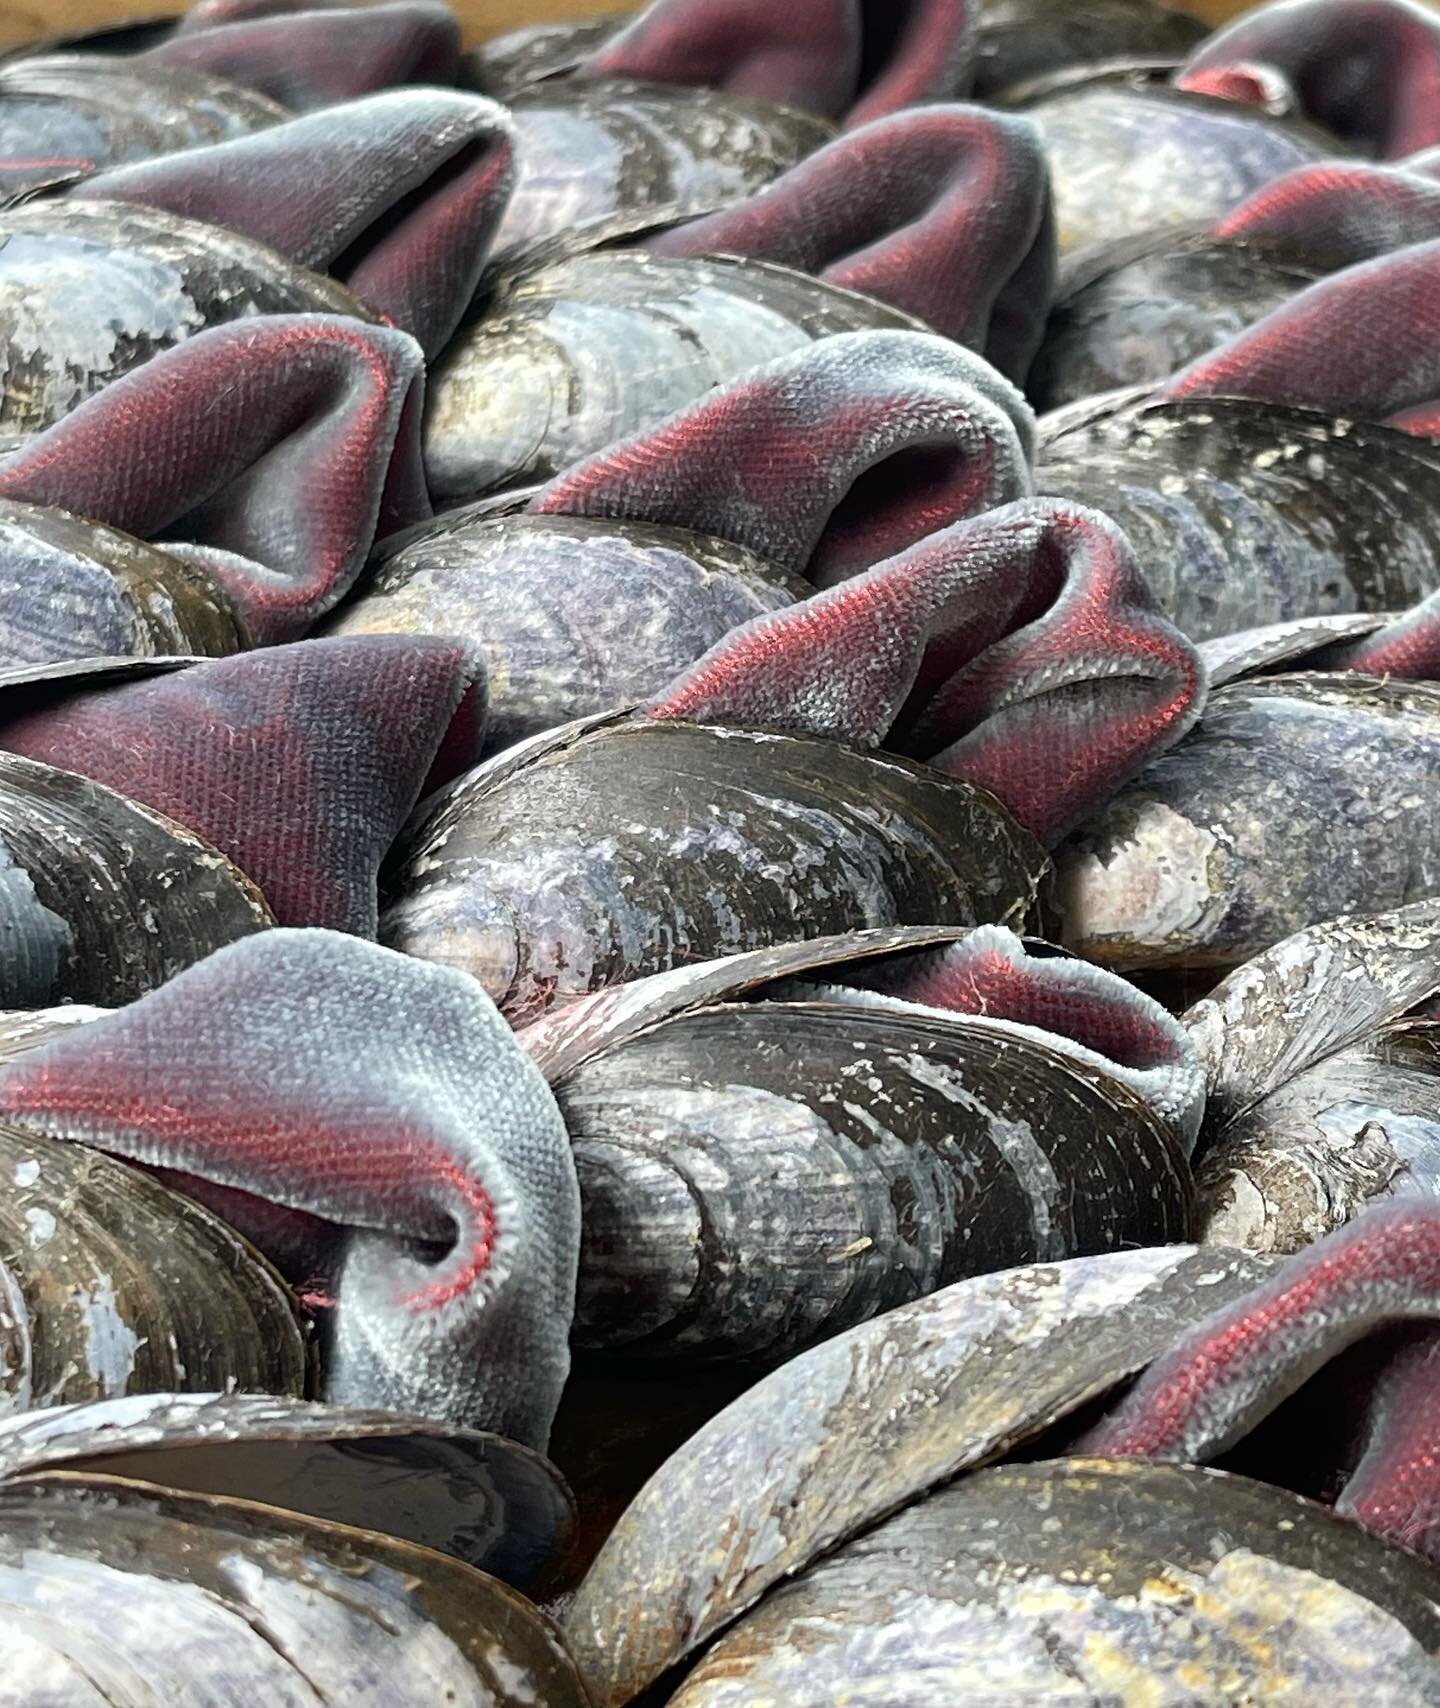 Mussels and velvet wall treatment.

I am using a silver grey silk velvet shot with pink in between these mussel shells. Acoustics are wonderful as well as a feast for the eyes.
#shellinteriors
#shellwall
#decorativeinteriors
#shellwork
#interiorsecor